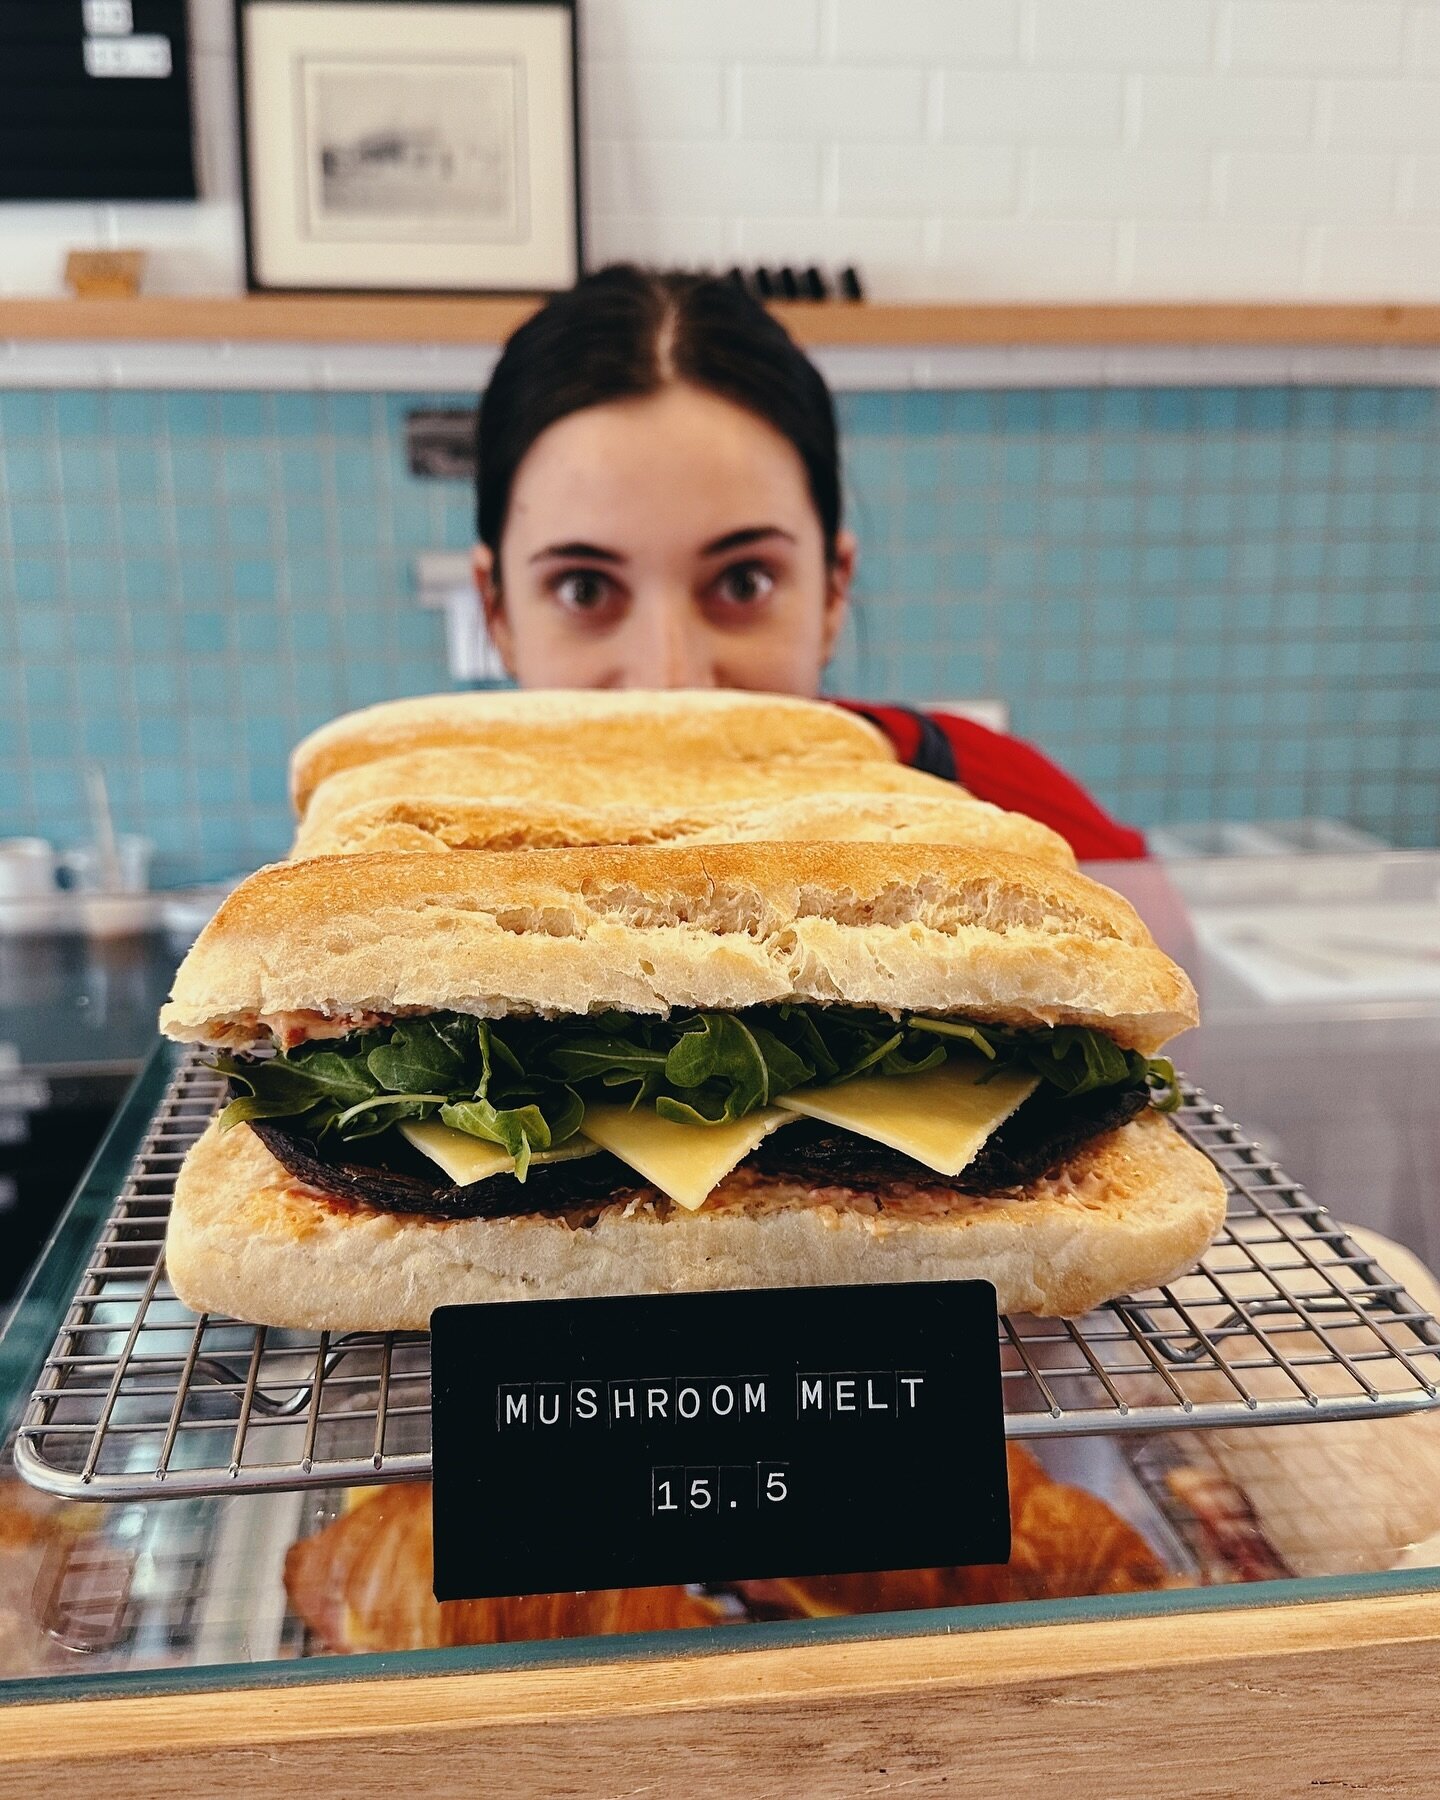 It&rsquo;s March! Our roll of the month is The Mushroom Melt, an old fave 🍄🍄🍄 kinda tastes like a pizza. Garlic butter roasted field mushroom, sundried tomato mayo, cheese and rocket in a @lamadrebakery long ciabatta. Every day until sold out!